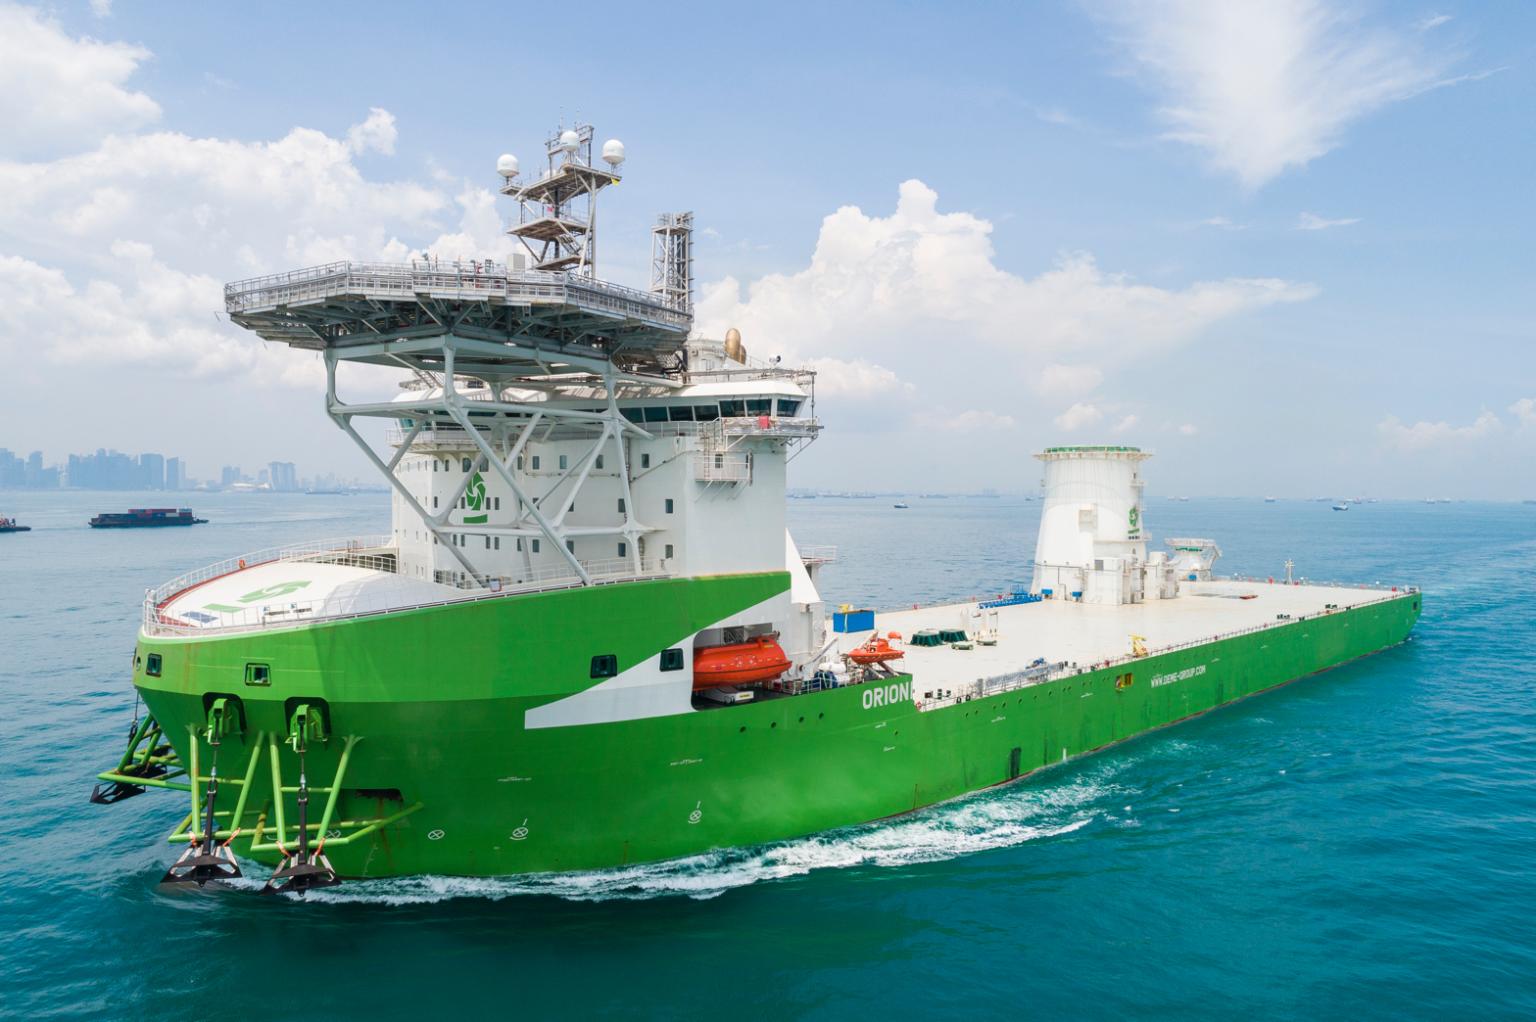 DEME's LNG-fueled offshore installation vessel heads for Europe